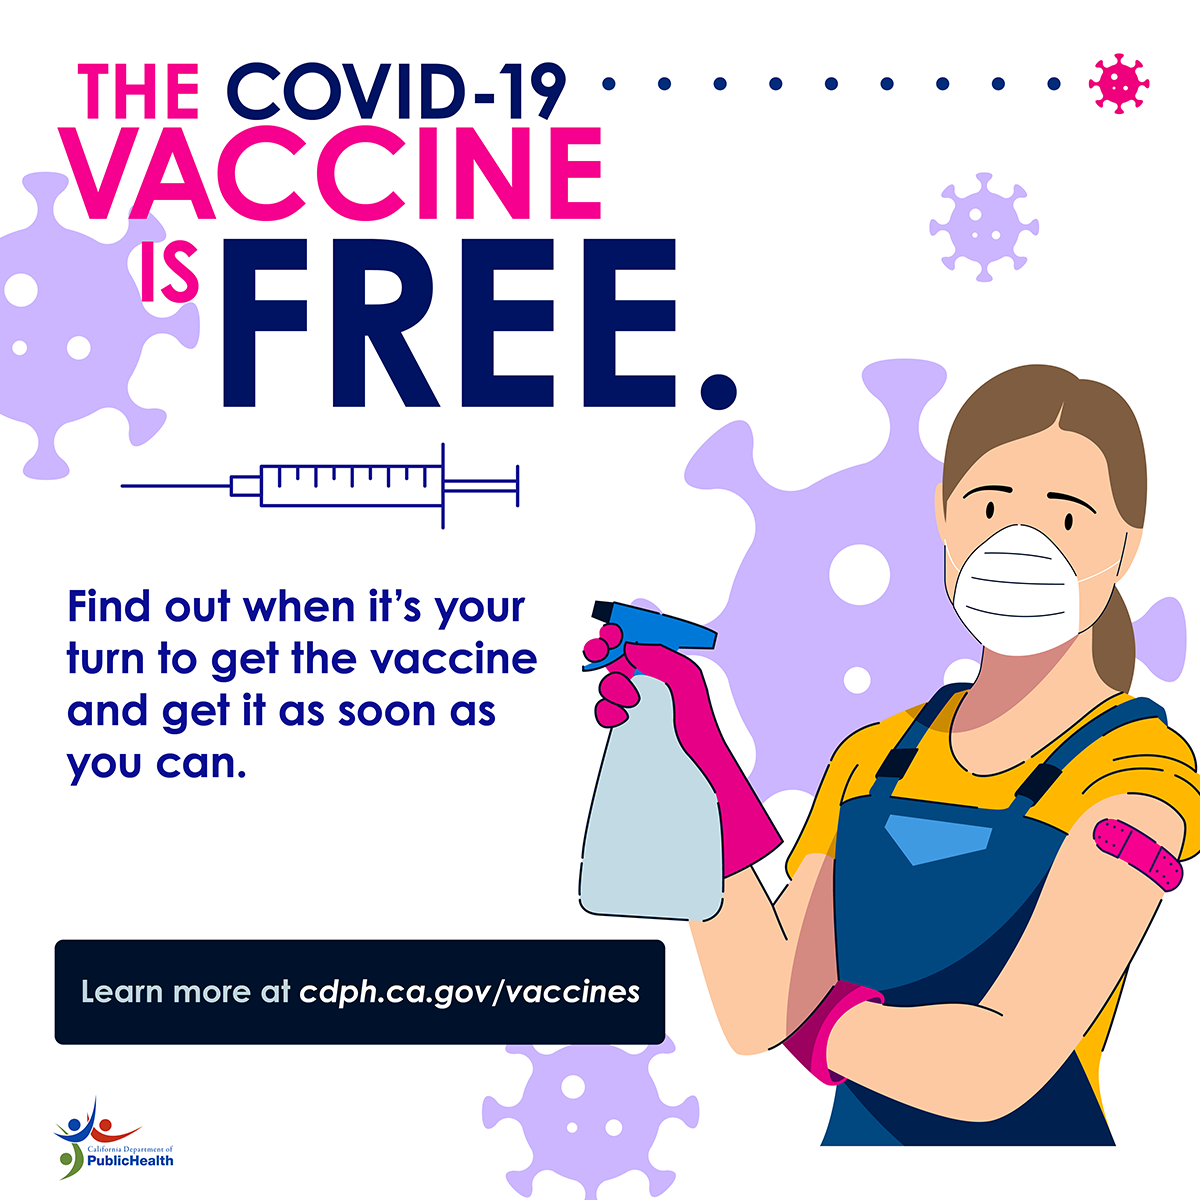 The COVID-19 vaccine is free. Find out when it's your turn to get the vaccine and get it as soon as you can.